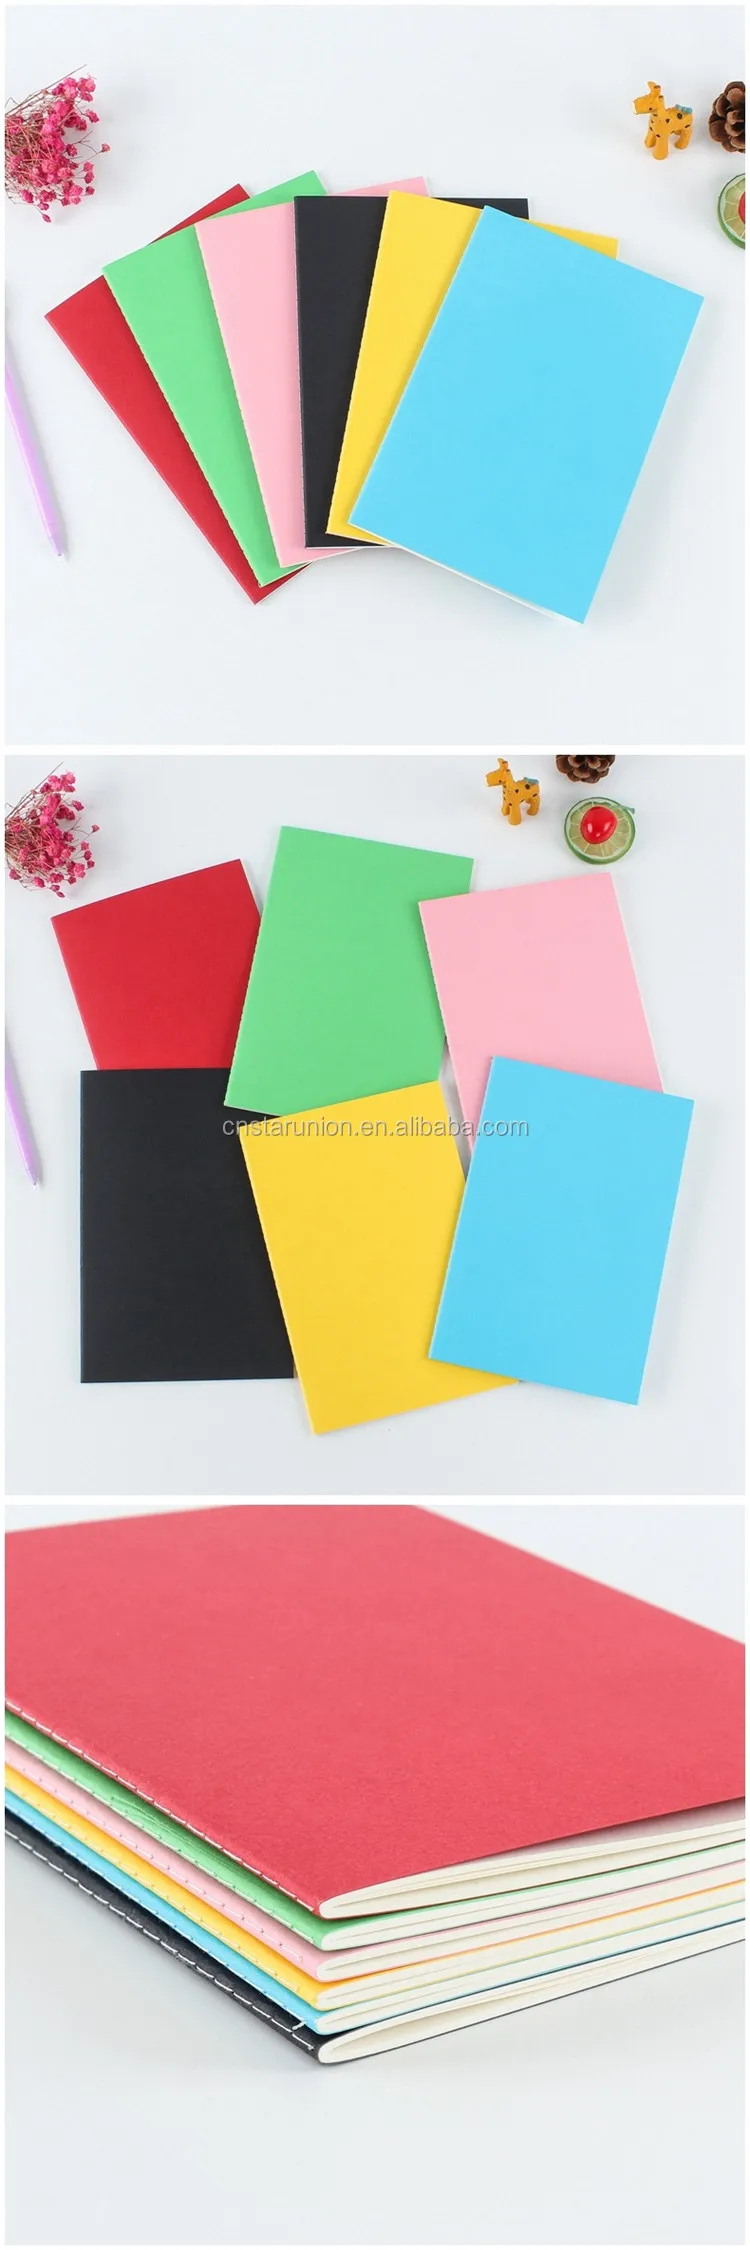 6pcs Travelers Notebook Thread-bound Journal Diary Memo Pad,A5 Size & 30 sheets Gridding Pages 